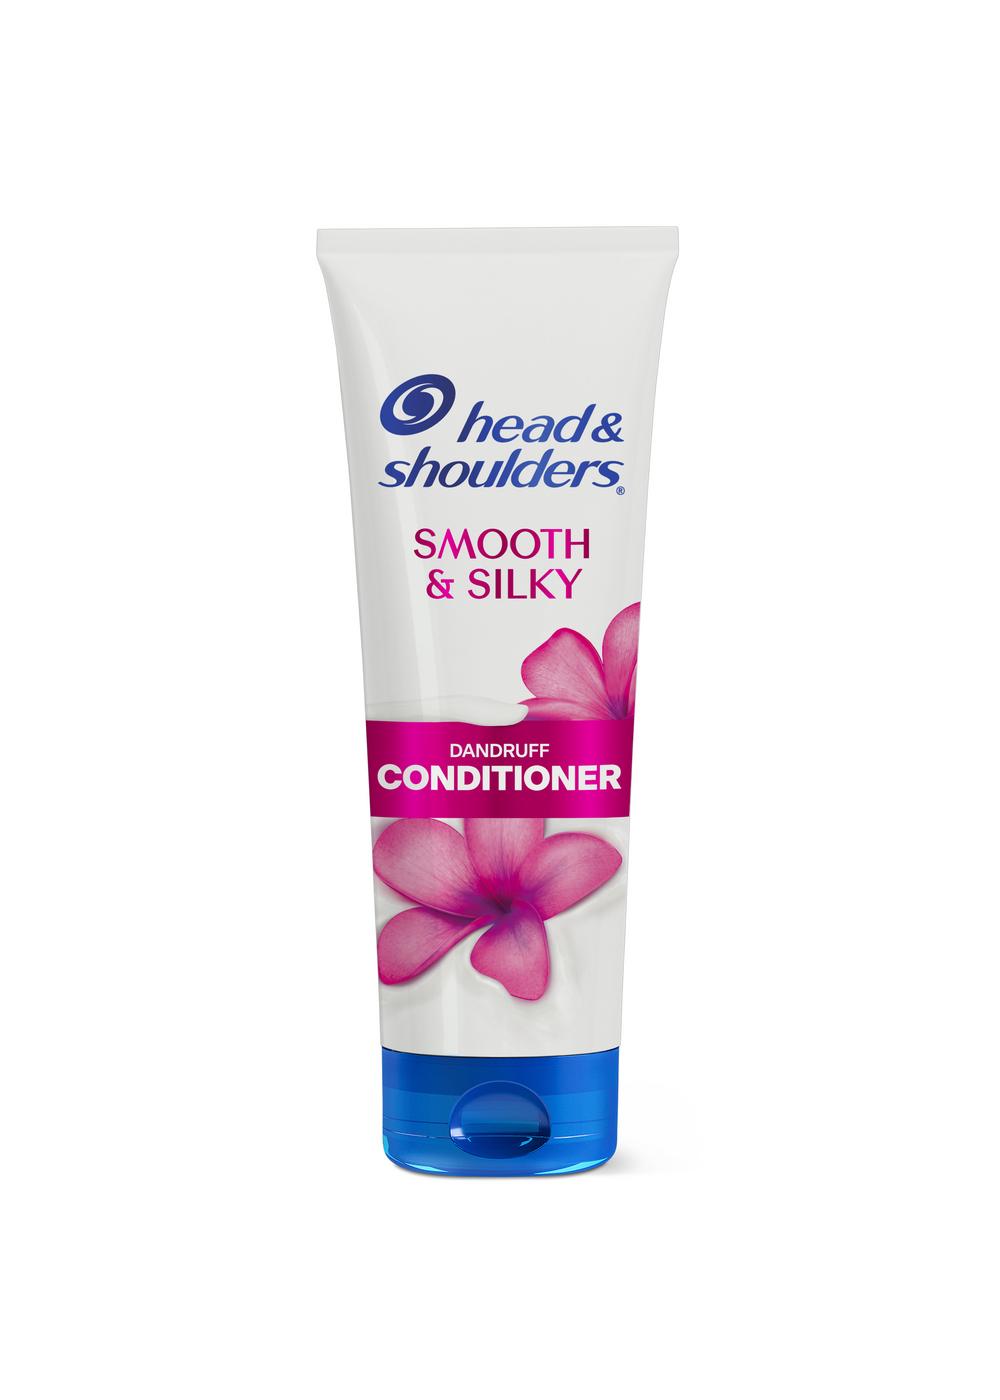 Head & Shoulders Dandruff Conditioner - Smooth & Silky; image 2 of 11